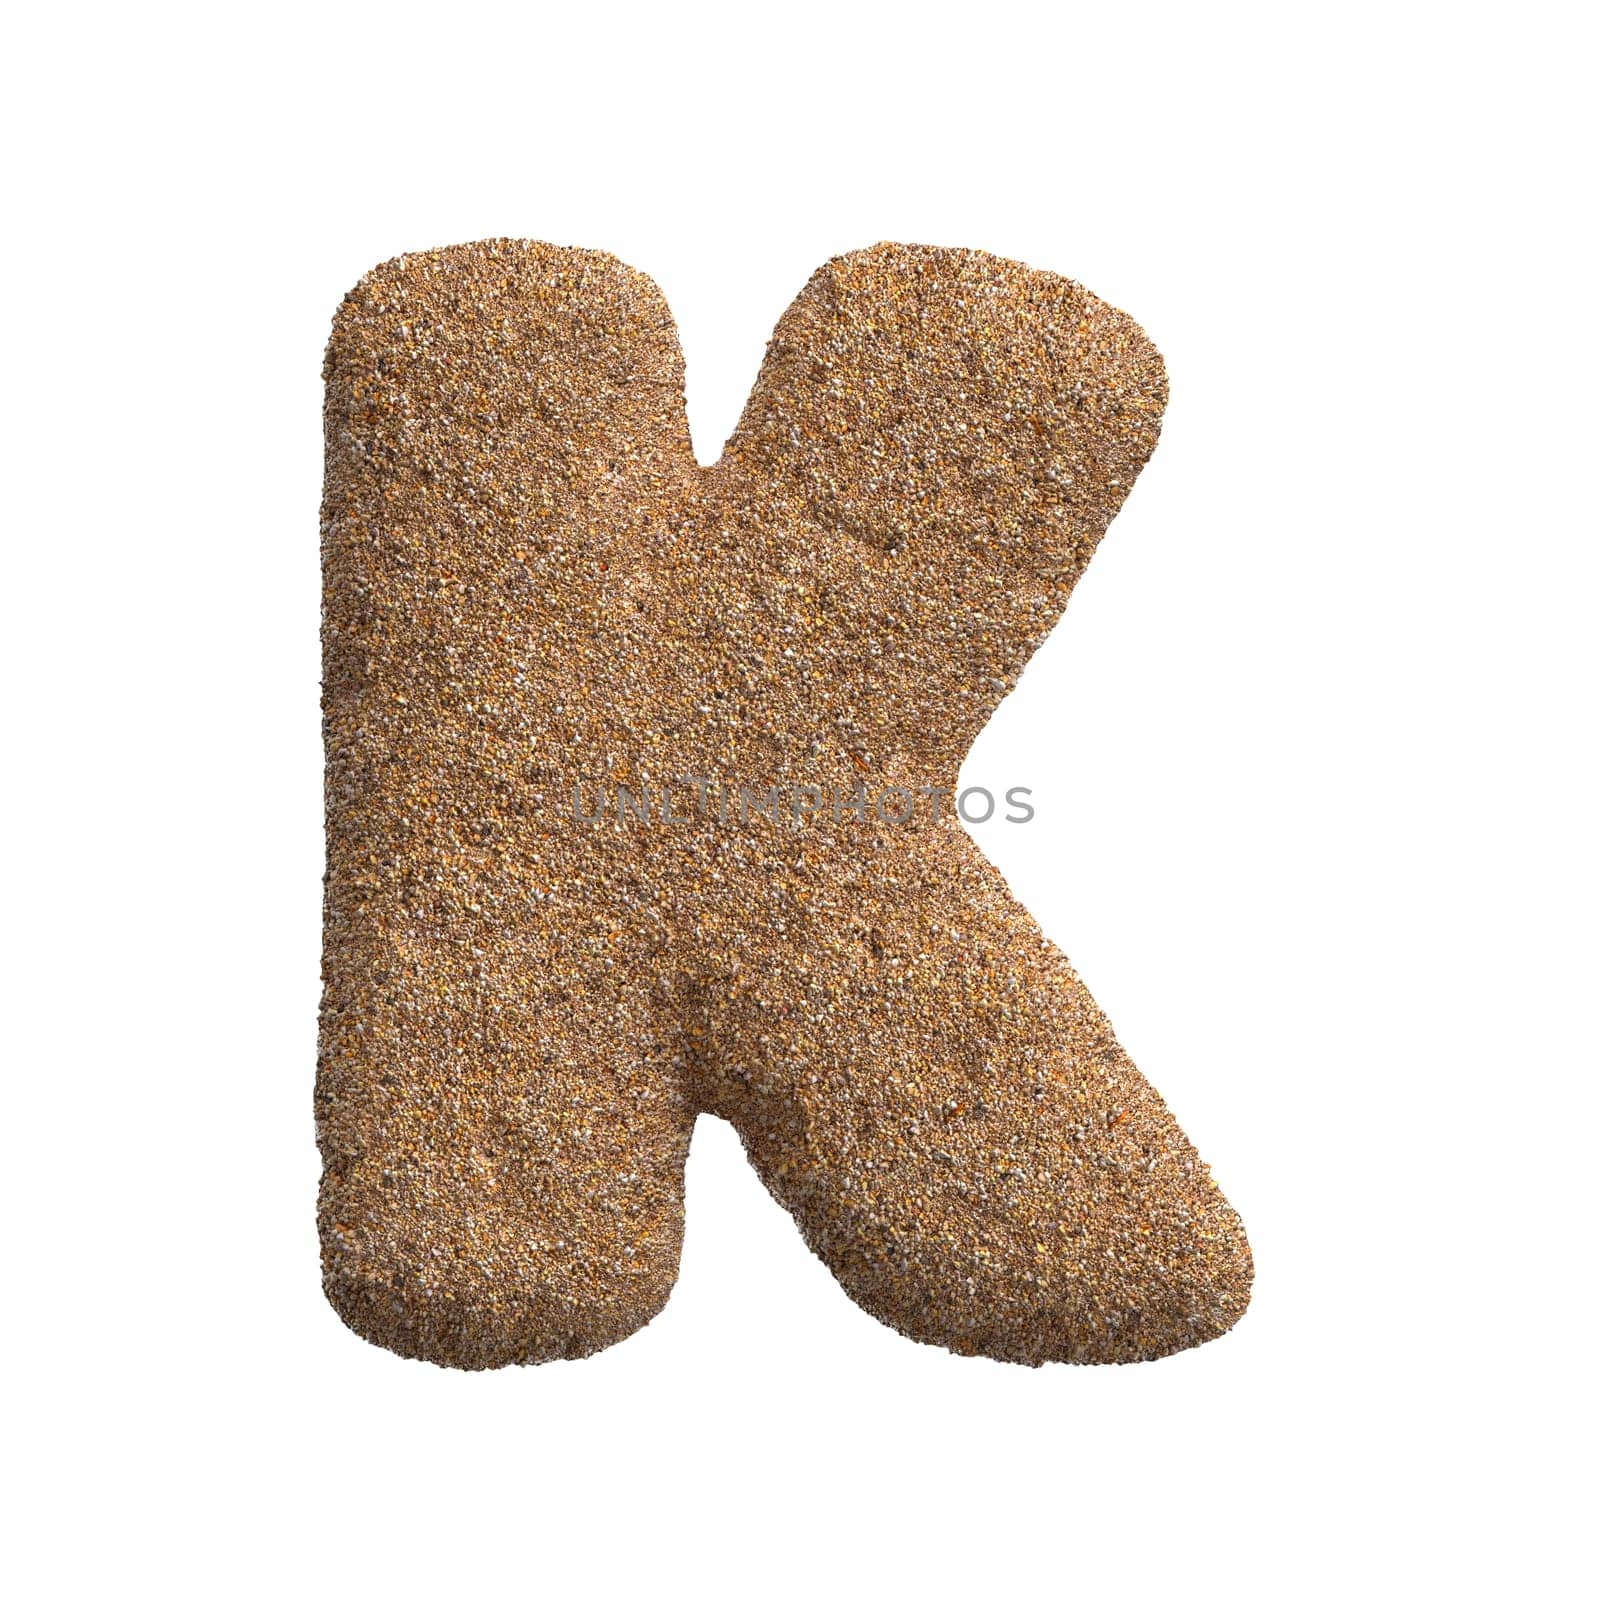 Sand letter K - Large 3d beach font isolated on white background. This alphabet is perfect for creative illustrations related but not limited to Holidays, travel, ocean...